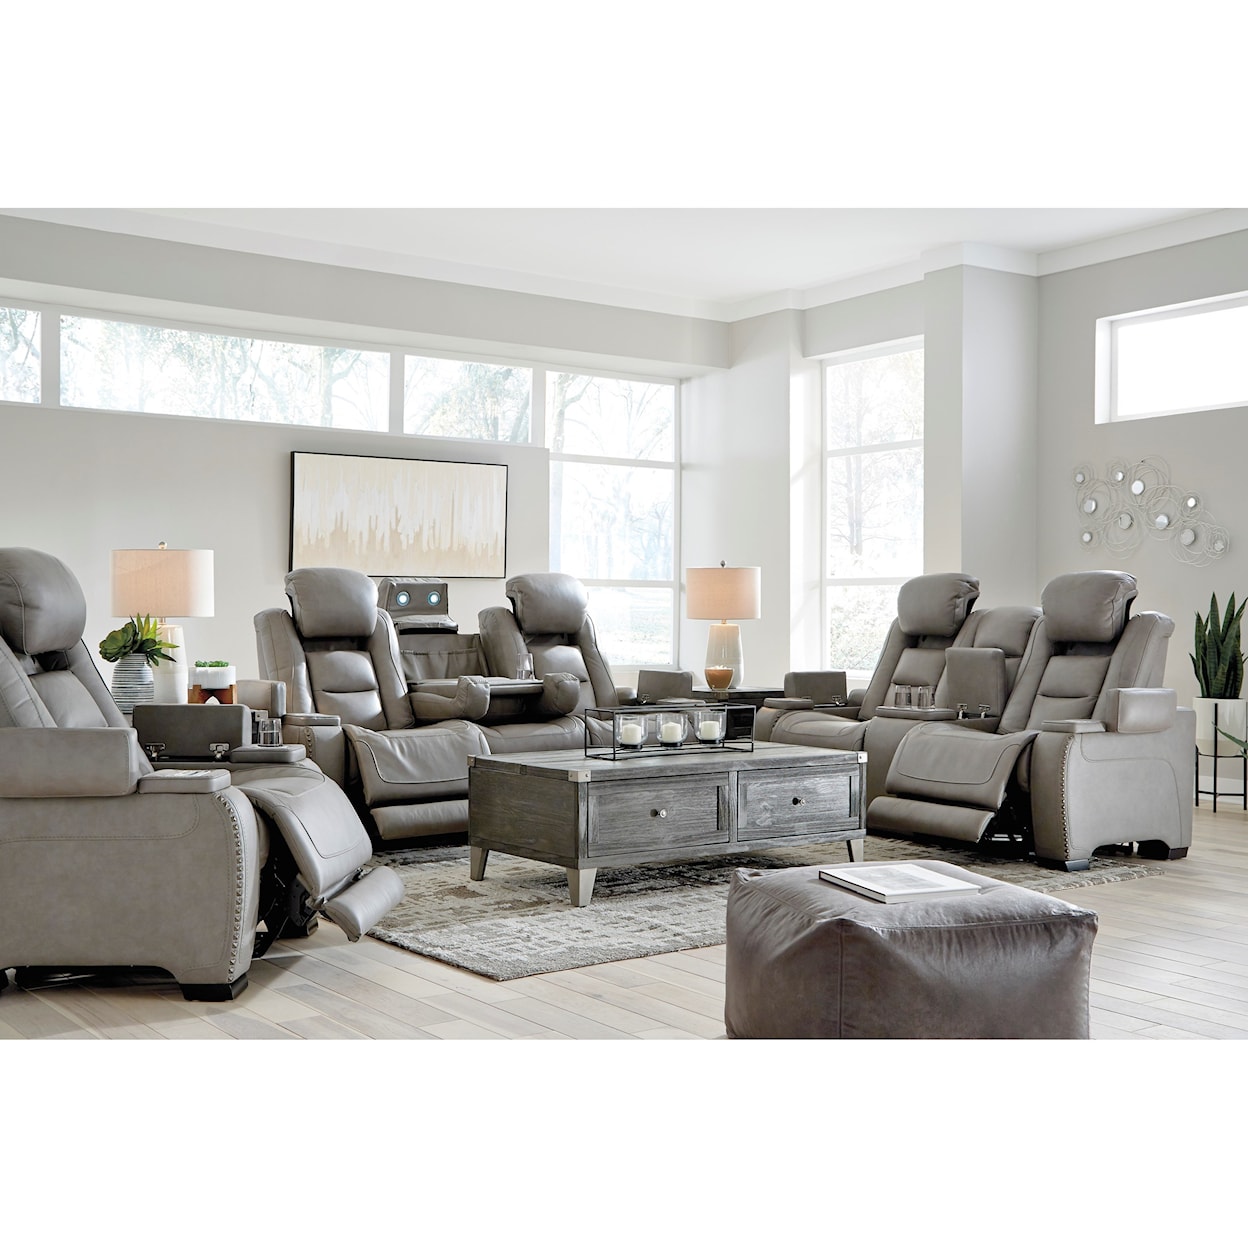 StyleLine The Man-Den Reclining Living Room Group